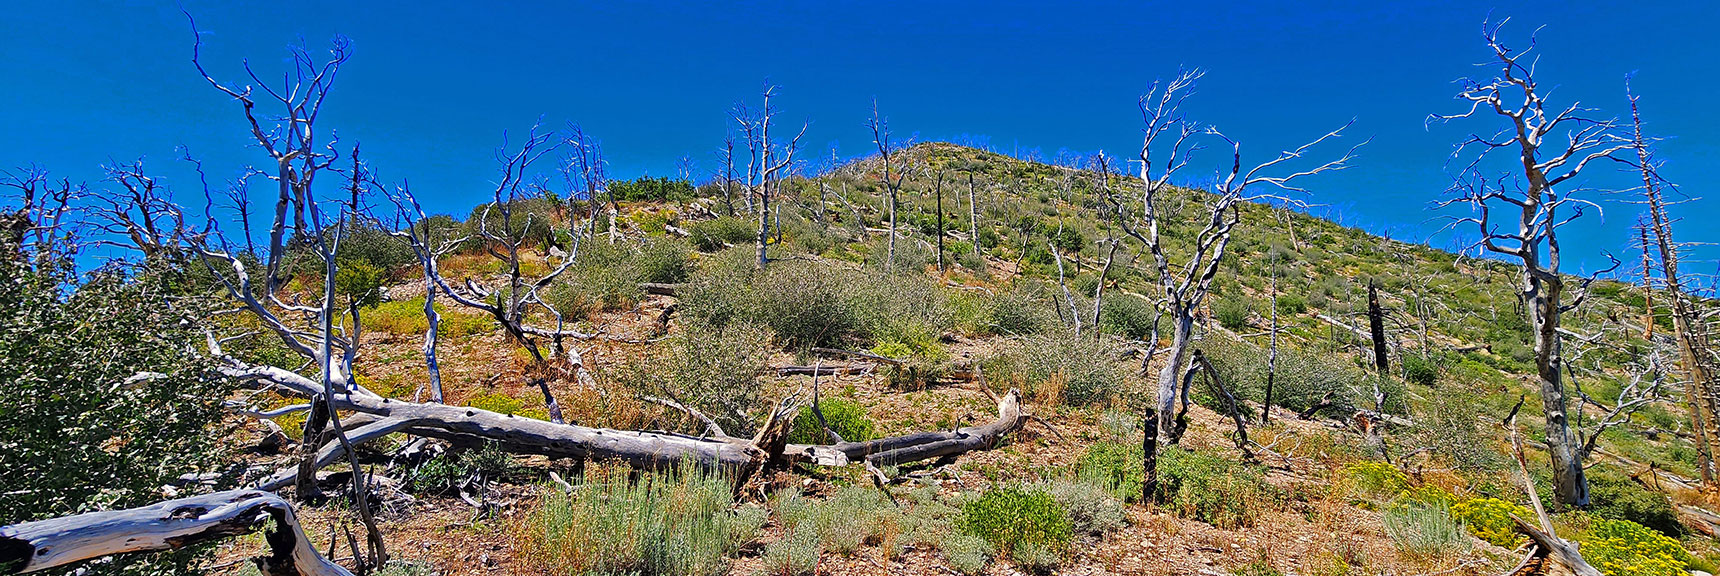 View Back to Southern High Point from Saddle Below | Wilson Ridge Lower Loop | Lovell Canyon, Nevada